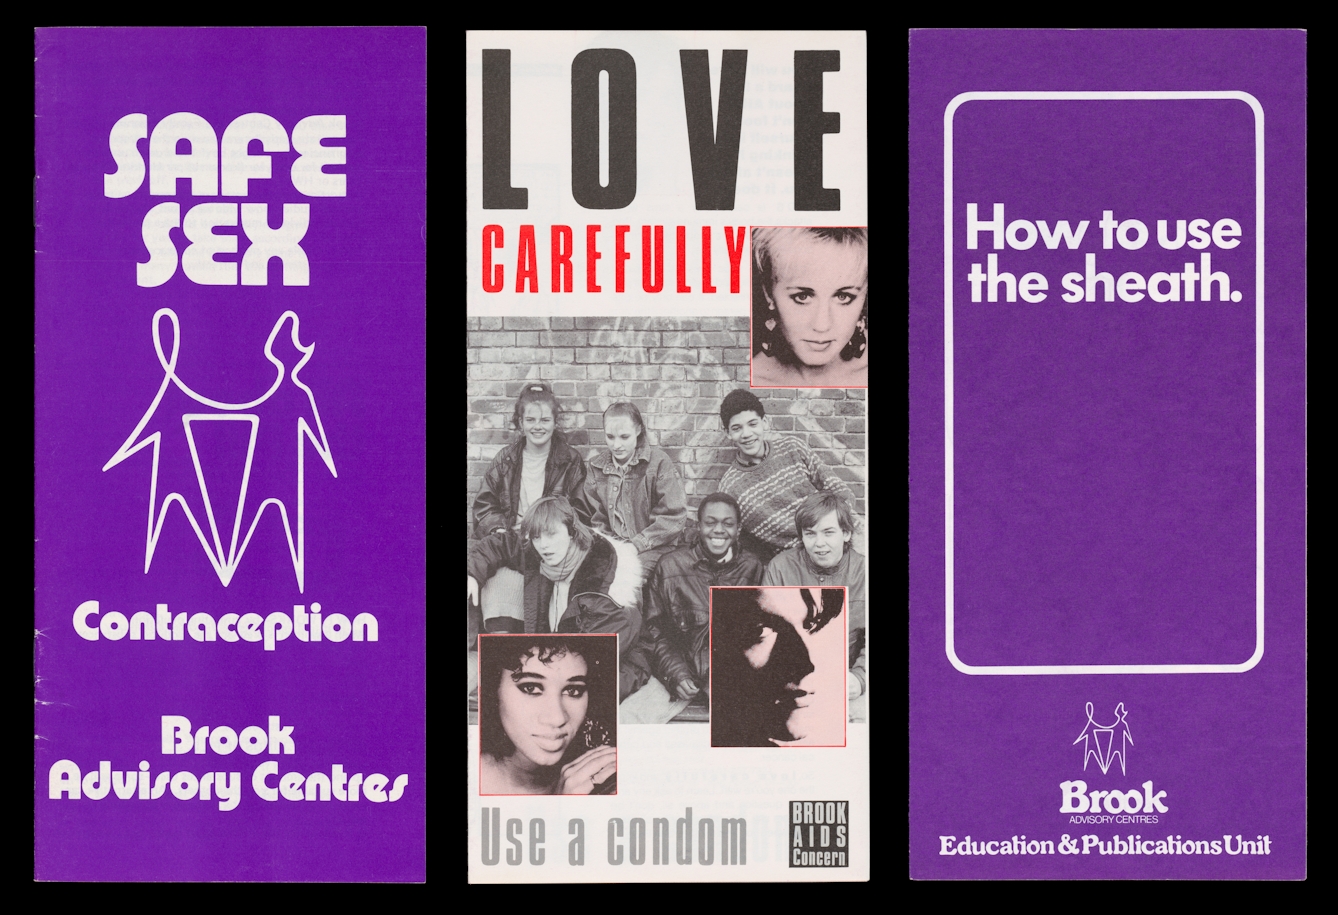 Photograph of archive material from the 1980s against a black background. The image shows 3 DL size leaflets, side by side. The leaflets to the left and right are a purple colour with white text and graphics. The one to the left carries the words 'Safe Sex, Contraception, Brook Advisory Centres'. In the centre is an abstract line sketch of two people holding hands. The one to the right carries the words 'How to use the sheath' within a rounded edged rectangular white line. The leaflet in the middle show a black black and white photograph of a group of young people looking to camera, with 3 smaller red tinted portraits of young faces, overlaid onto of the first larger image. Surrounding the images are the words 'Love Carefully, Use a condom', with a small logo for the Brook Advisory Centres.